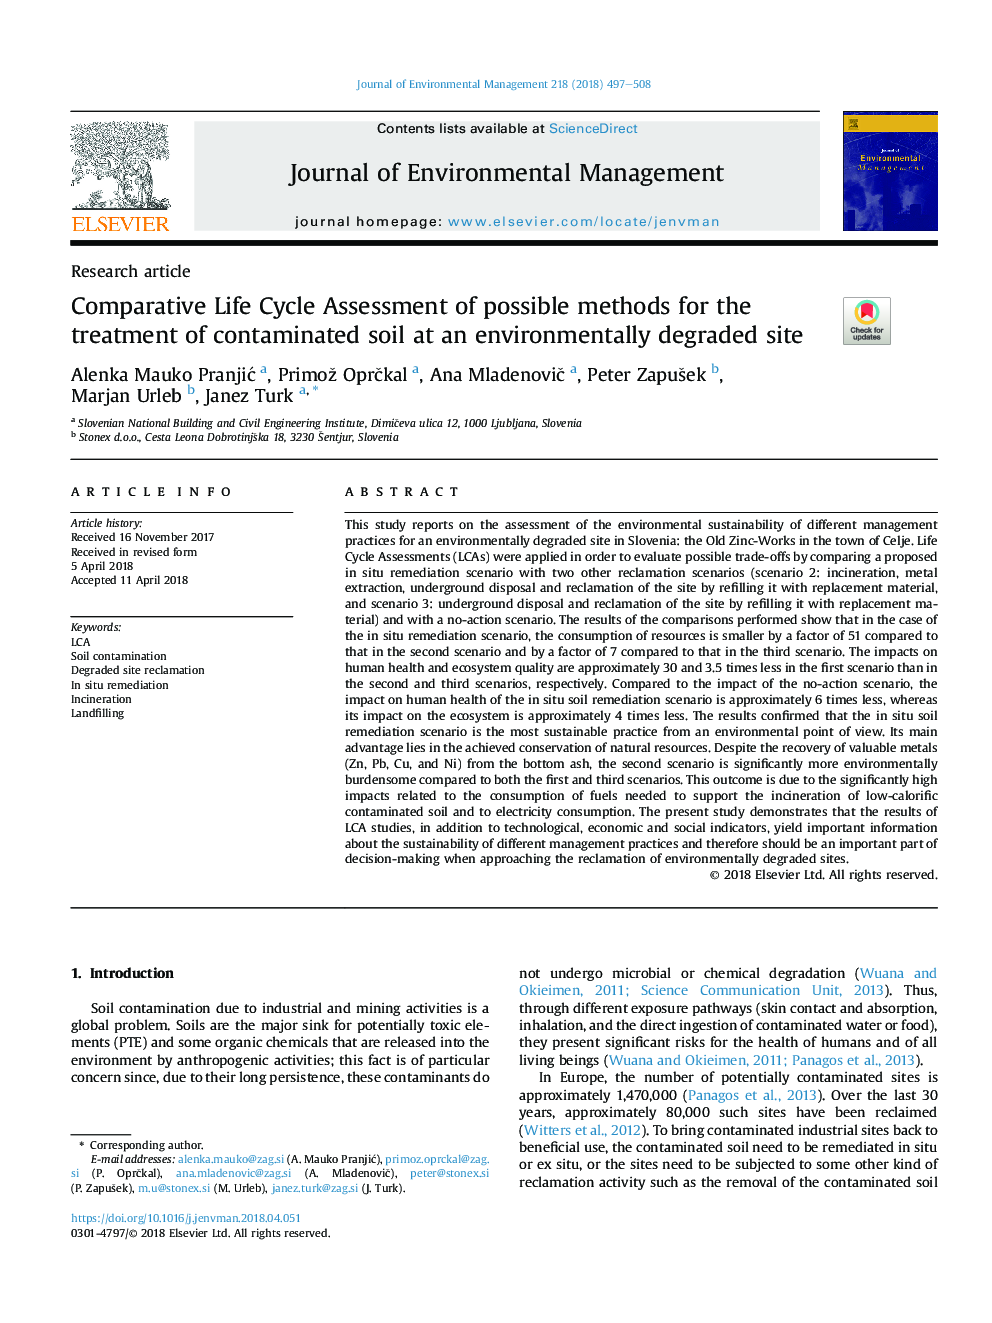 Comparative Life Cycle Assessment of possible methods for the treatment of contaminated soil at an environmentally degraded site